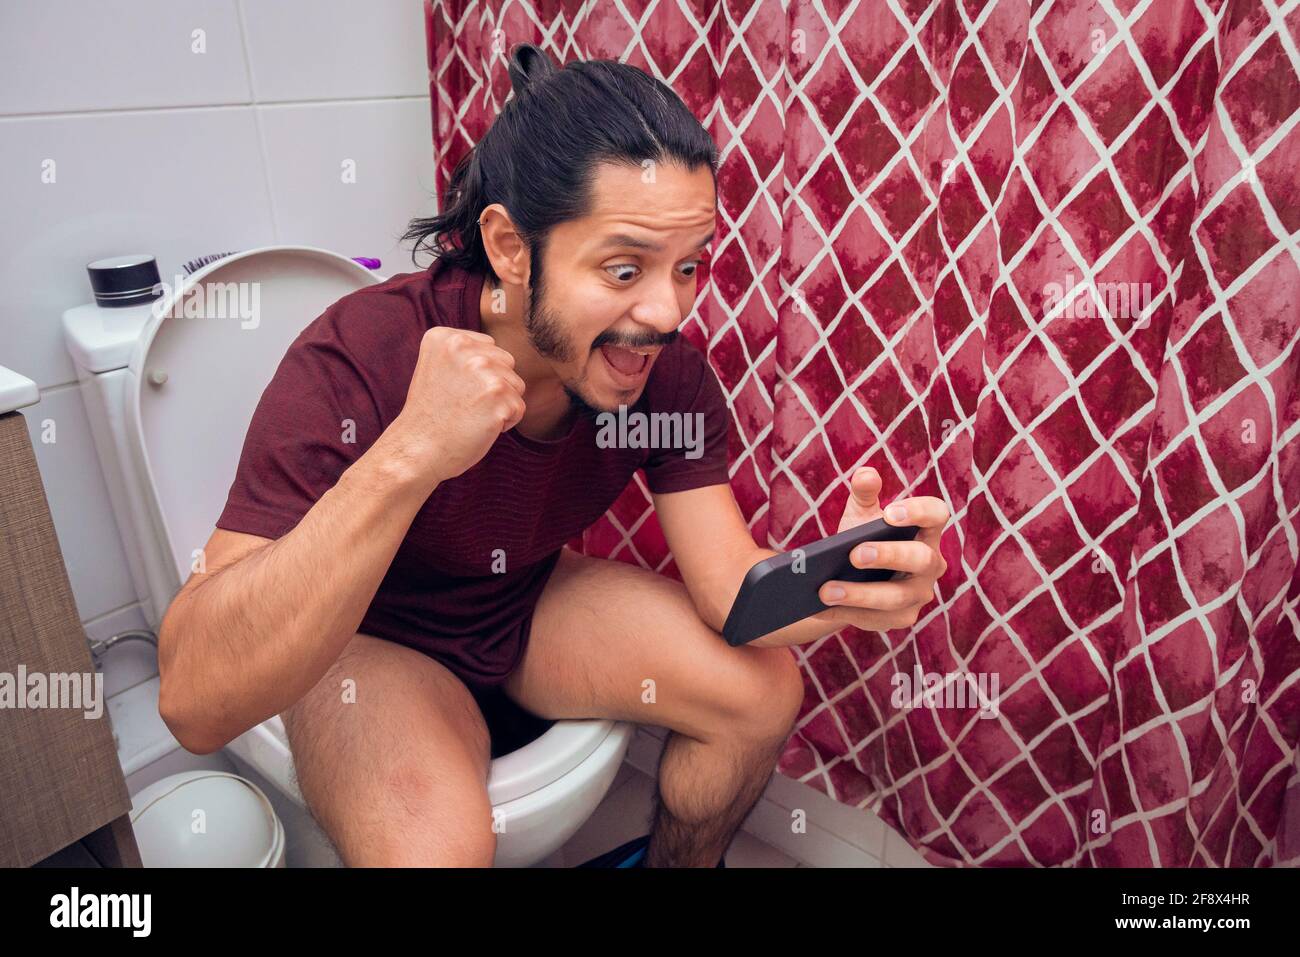 Young latin man smiling on the toilet using a smart phone at the bathroom. Stock Photo